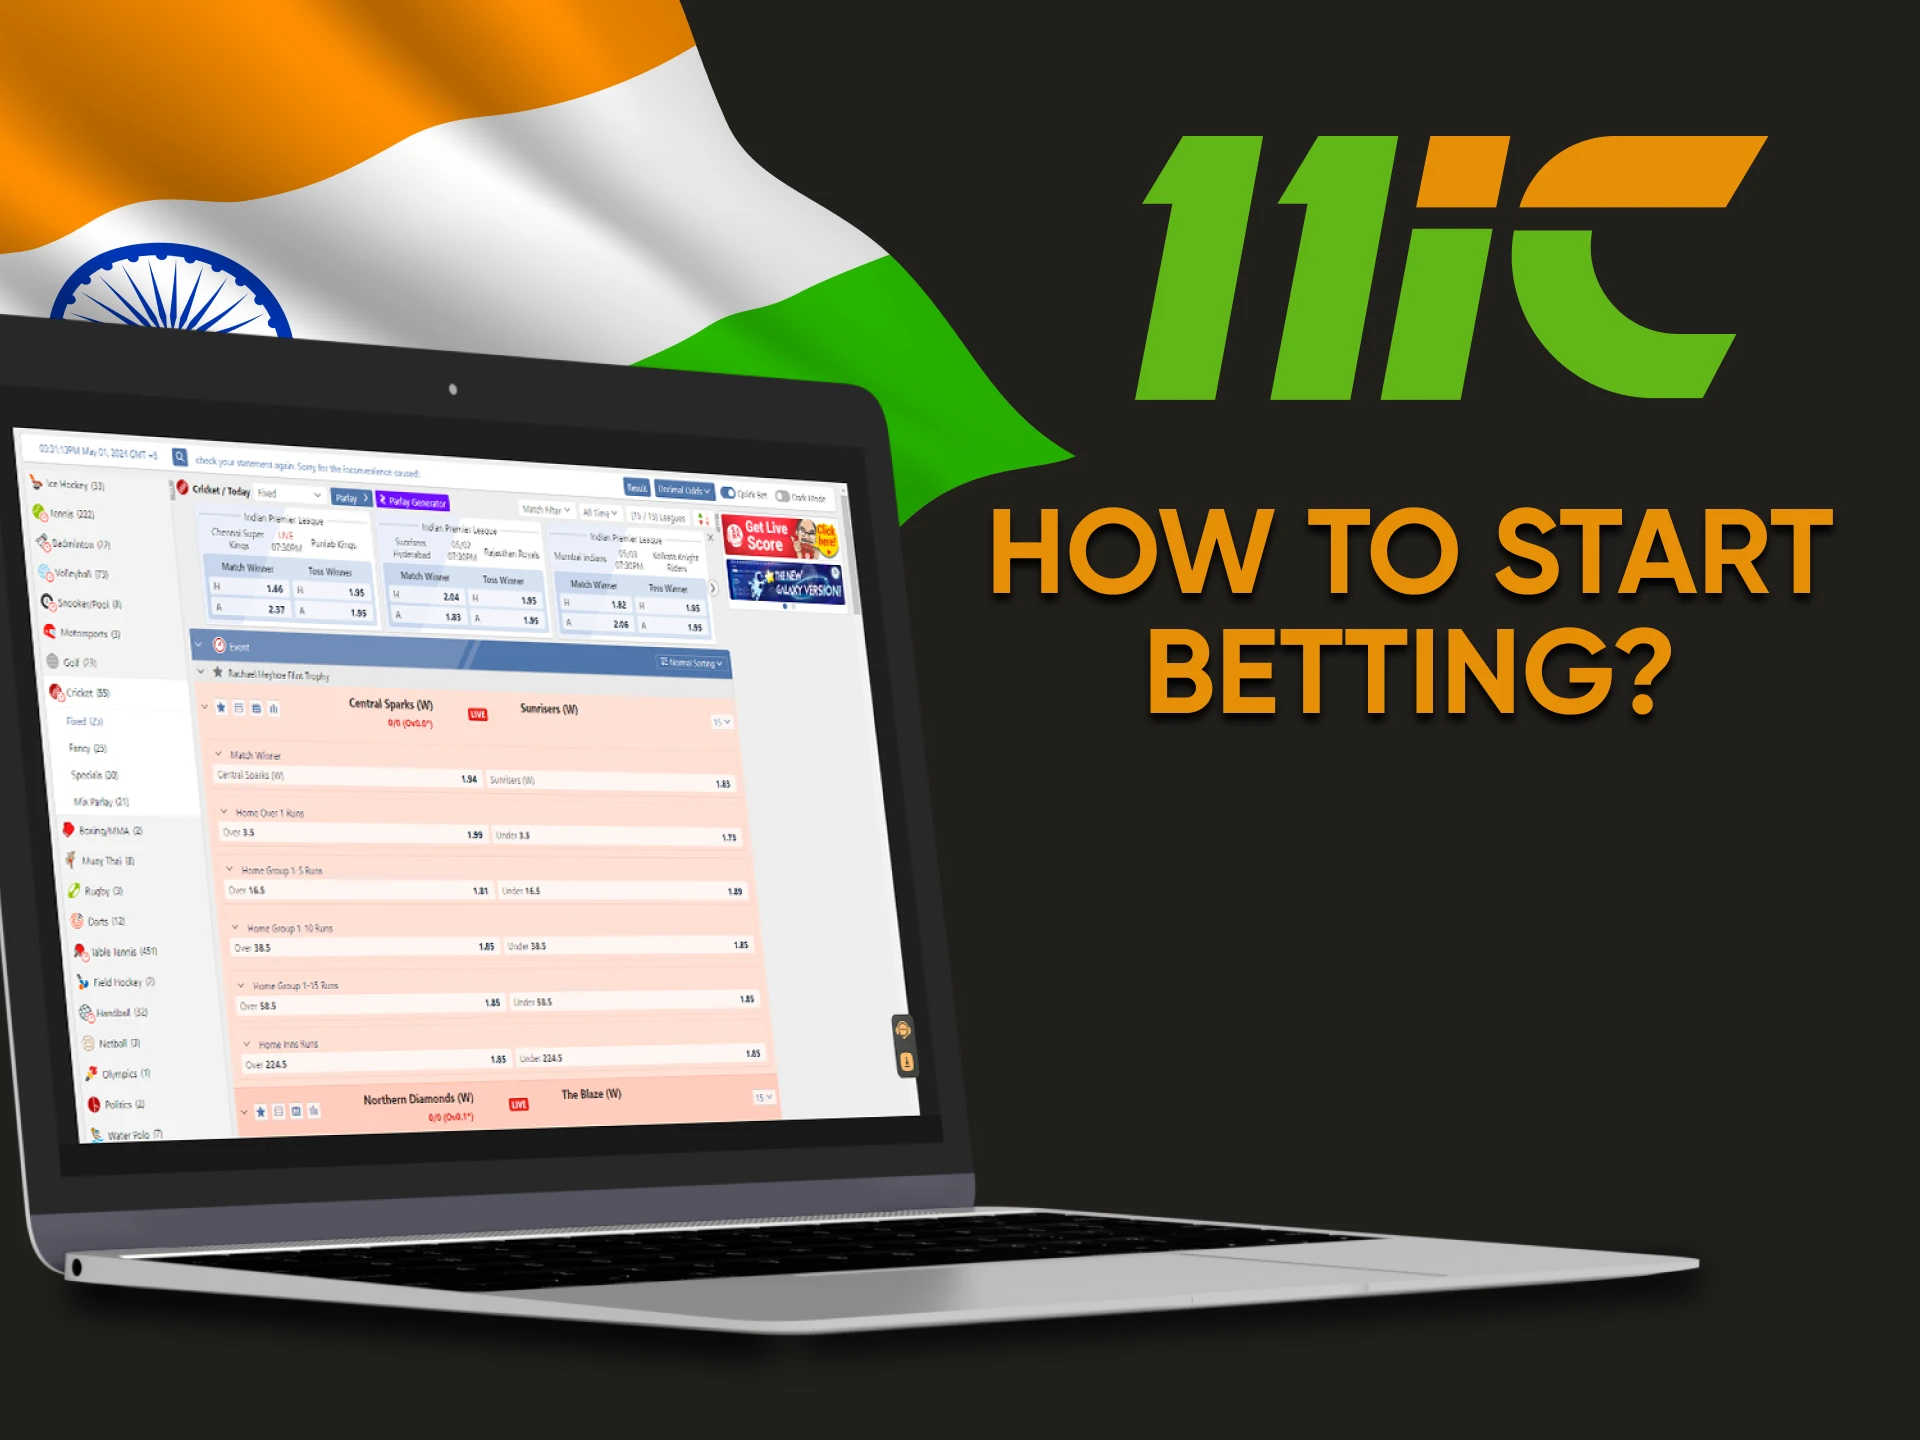 We'll show you how to start betting on sports on 11ic.